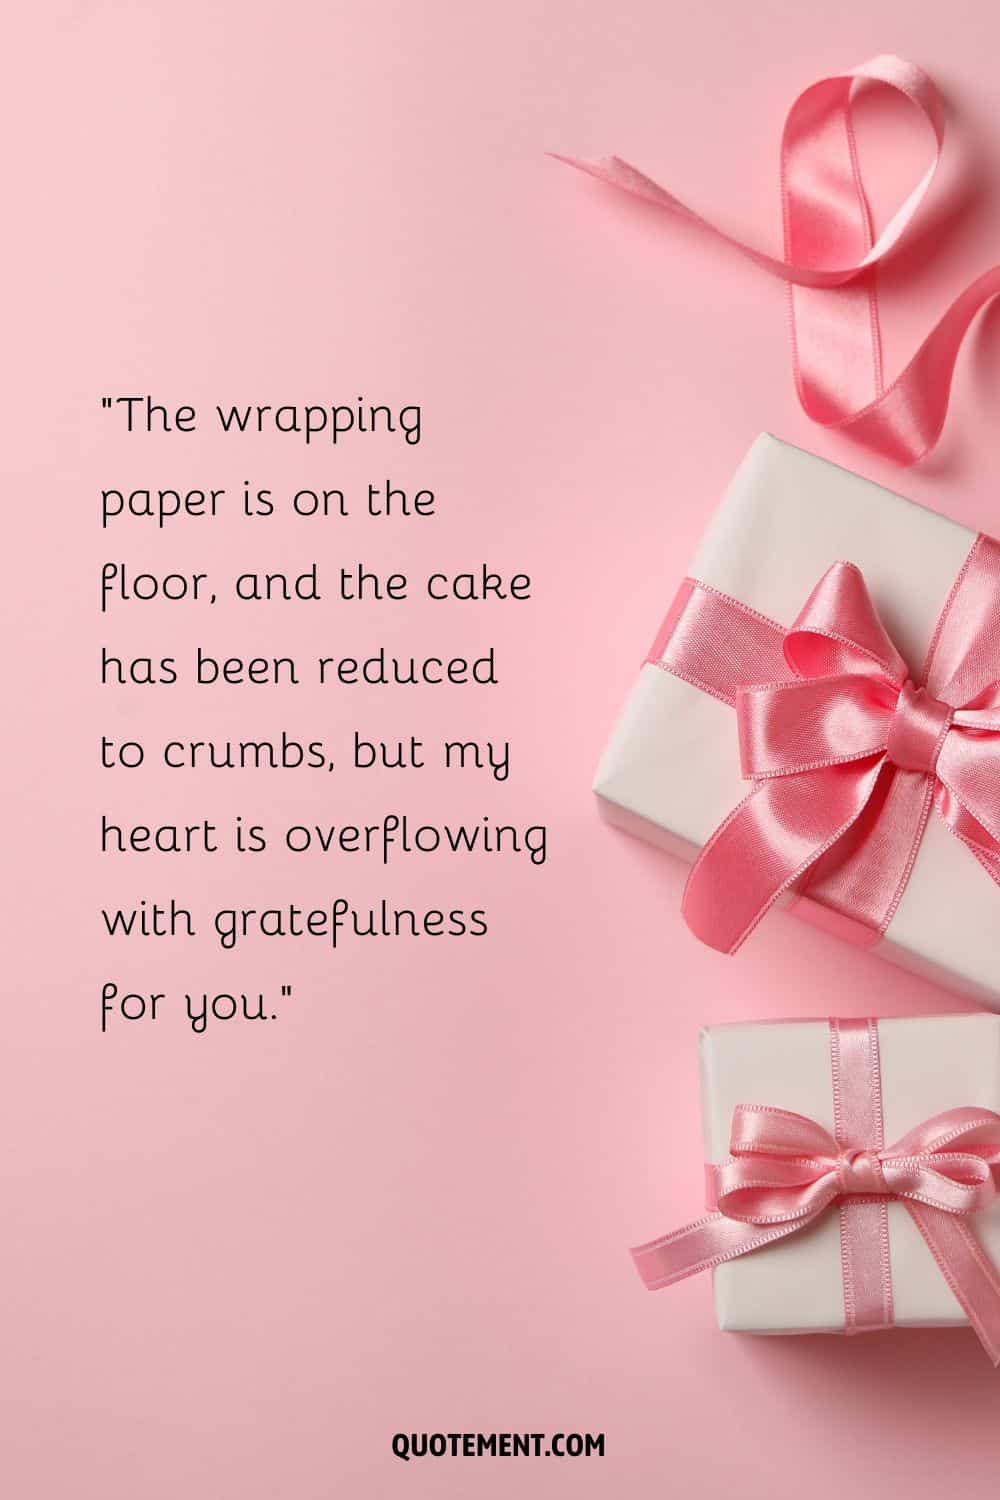 The wrapping paper is on the floor, and the cake has been reduced to crumbs, but my heart is overflowing with gratefulness for you